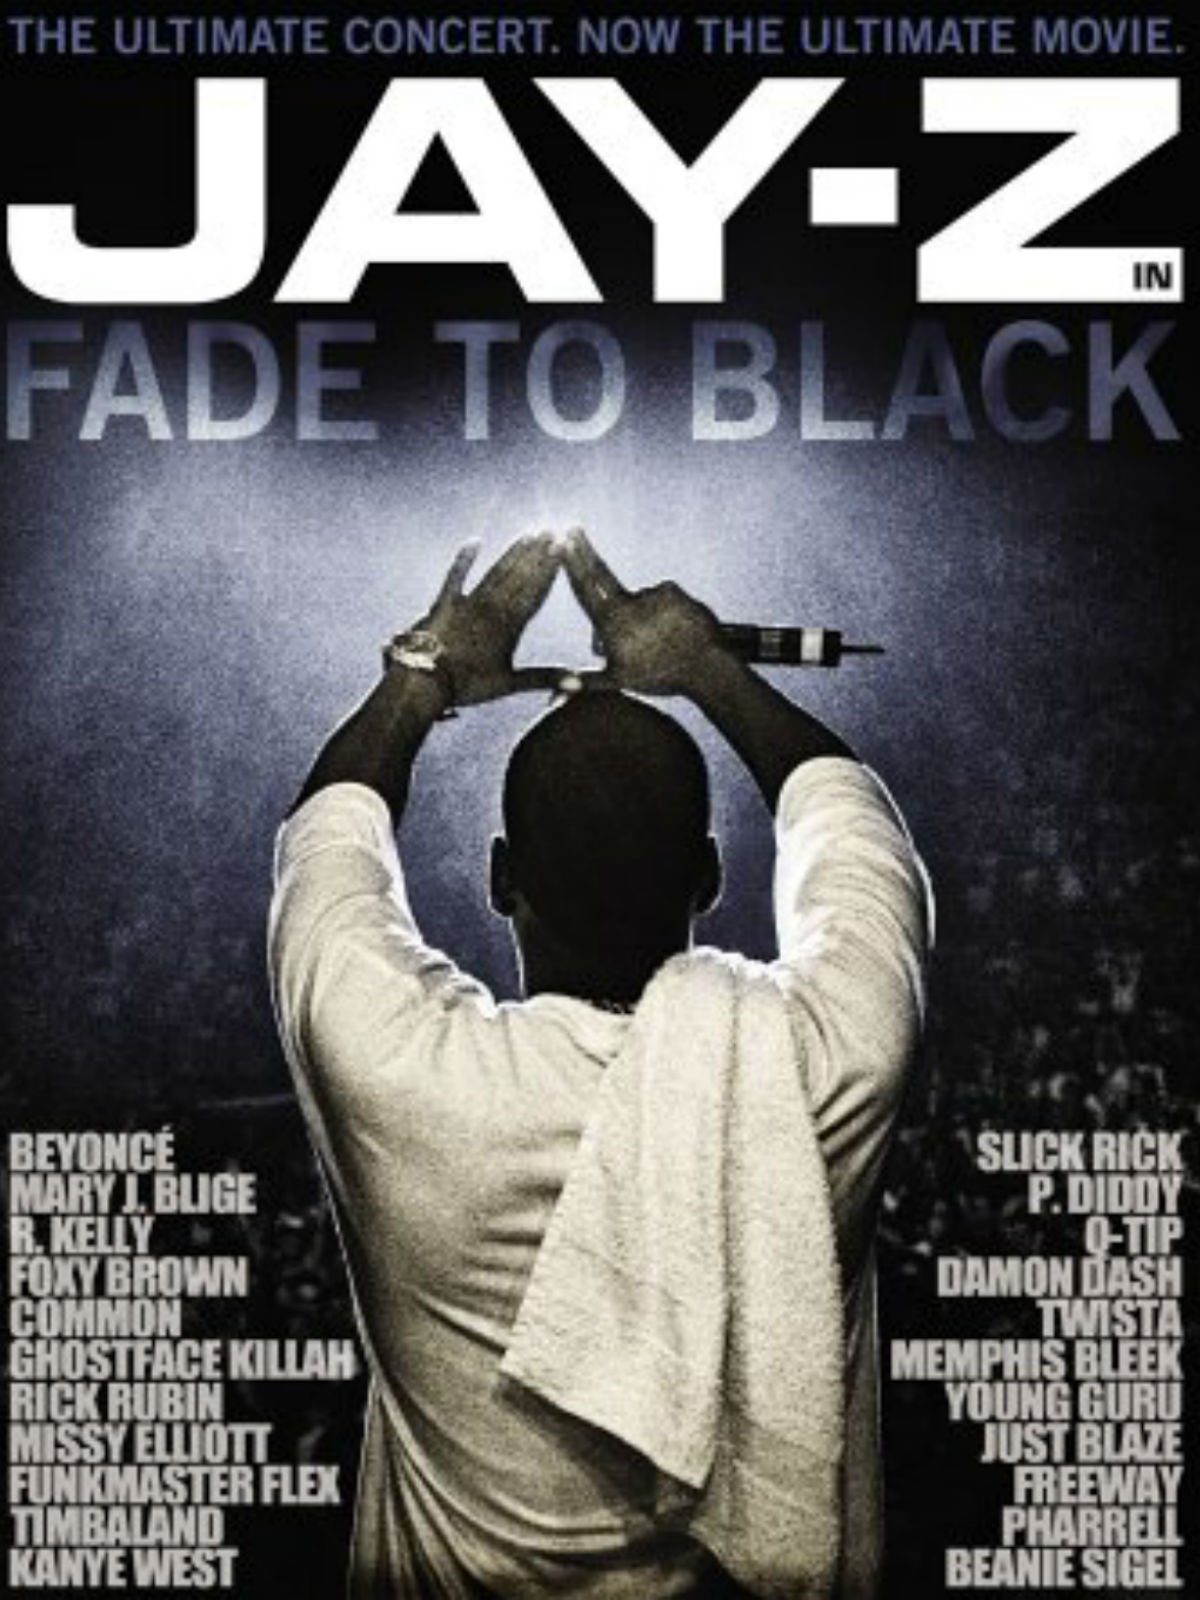 download fade to black movie jay z